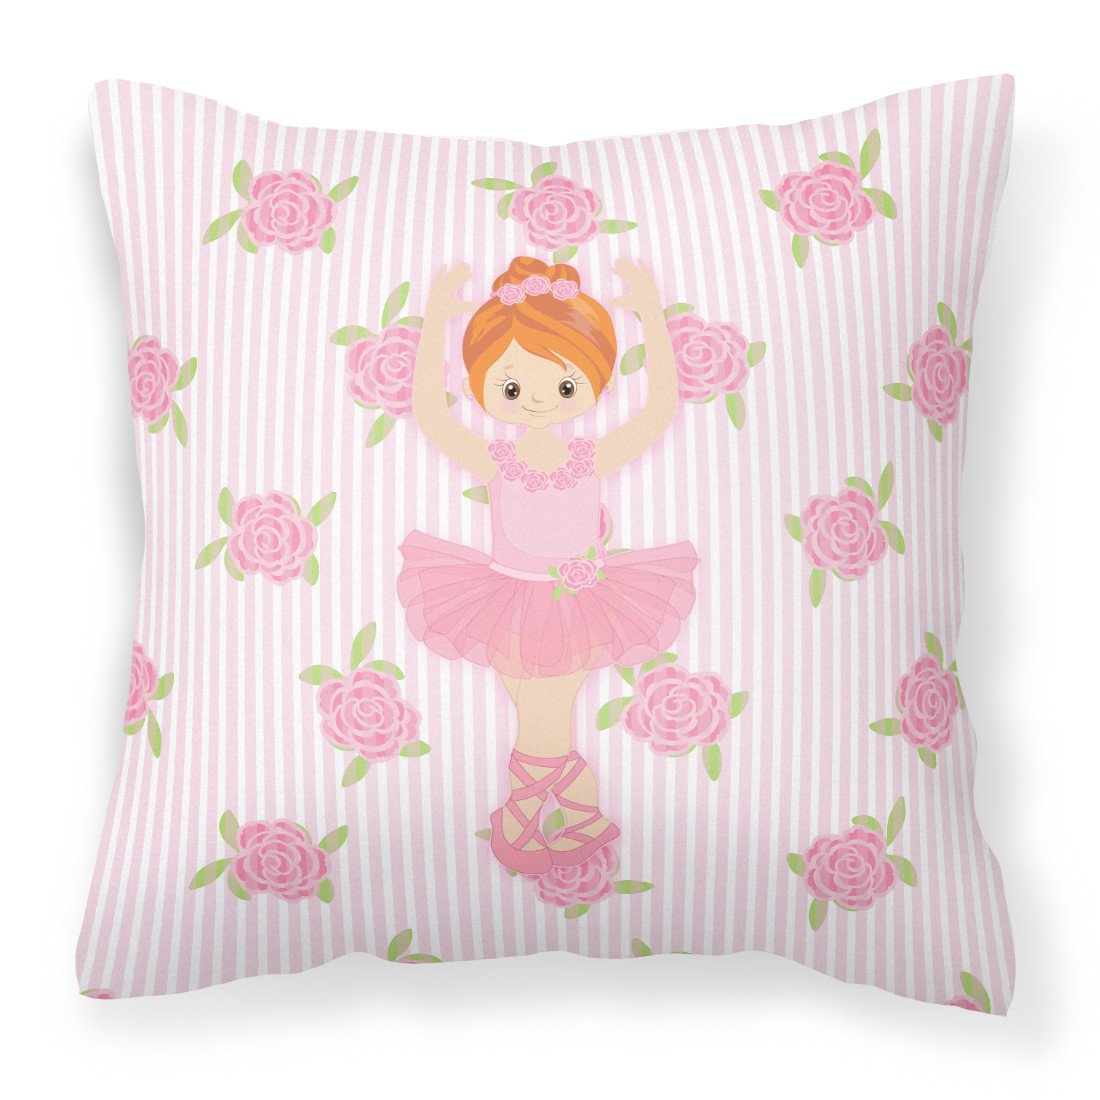 Ballerina Red Front Pose Fabric Decorative Pillow BB5169PW1818 by Caroline's Treasures